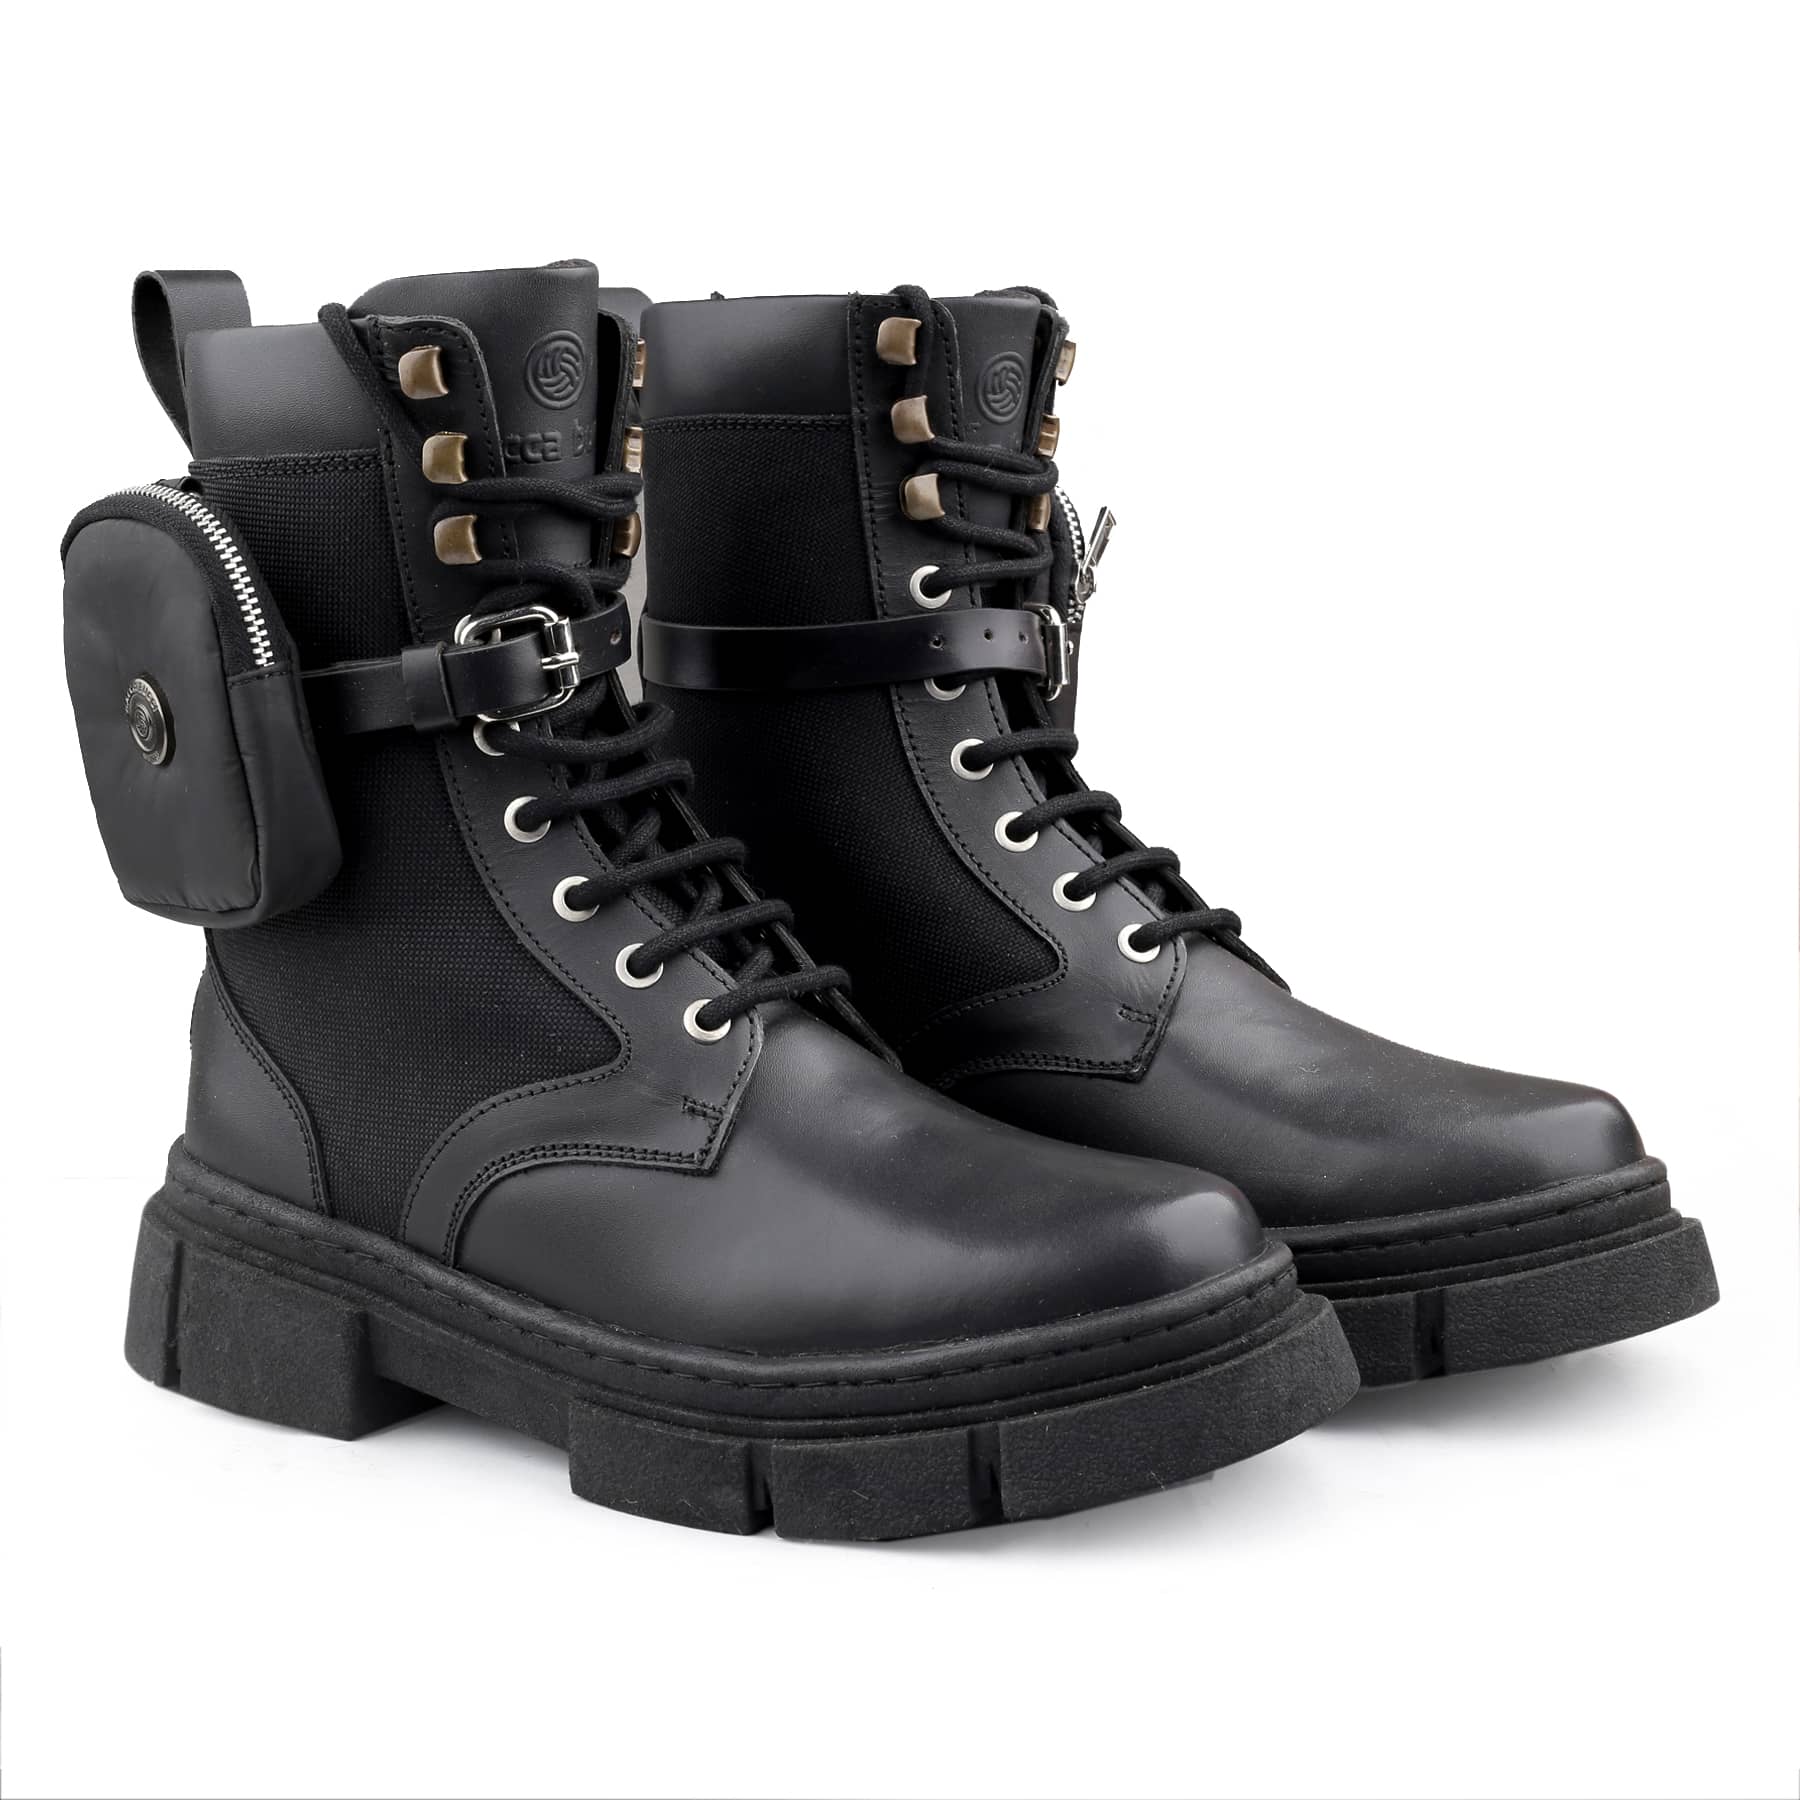 Bacca Bucci ASSASSIN brushed leather combat boots for Men with detachable coin pocket with adjustable strap and a chunky rubber lug sole | Genuine Leather Boots